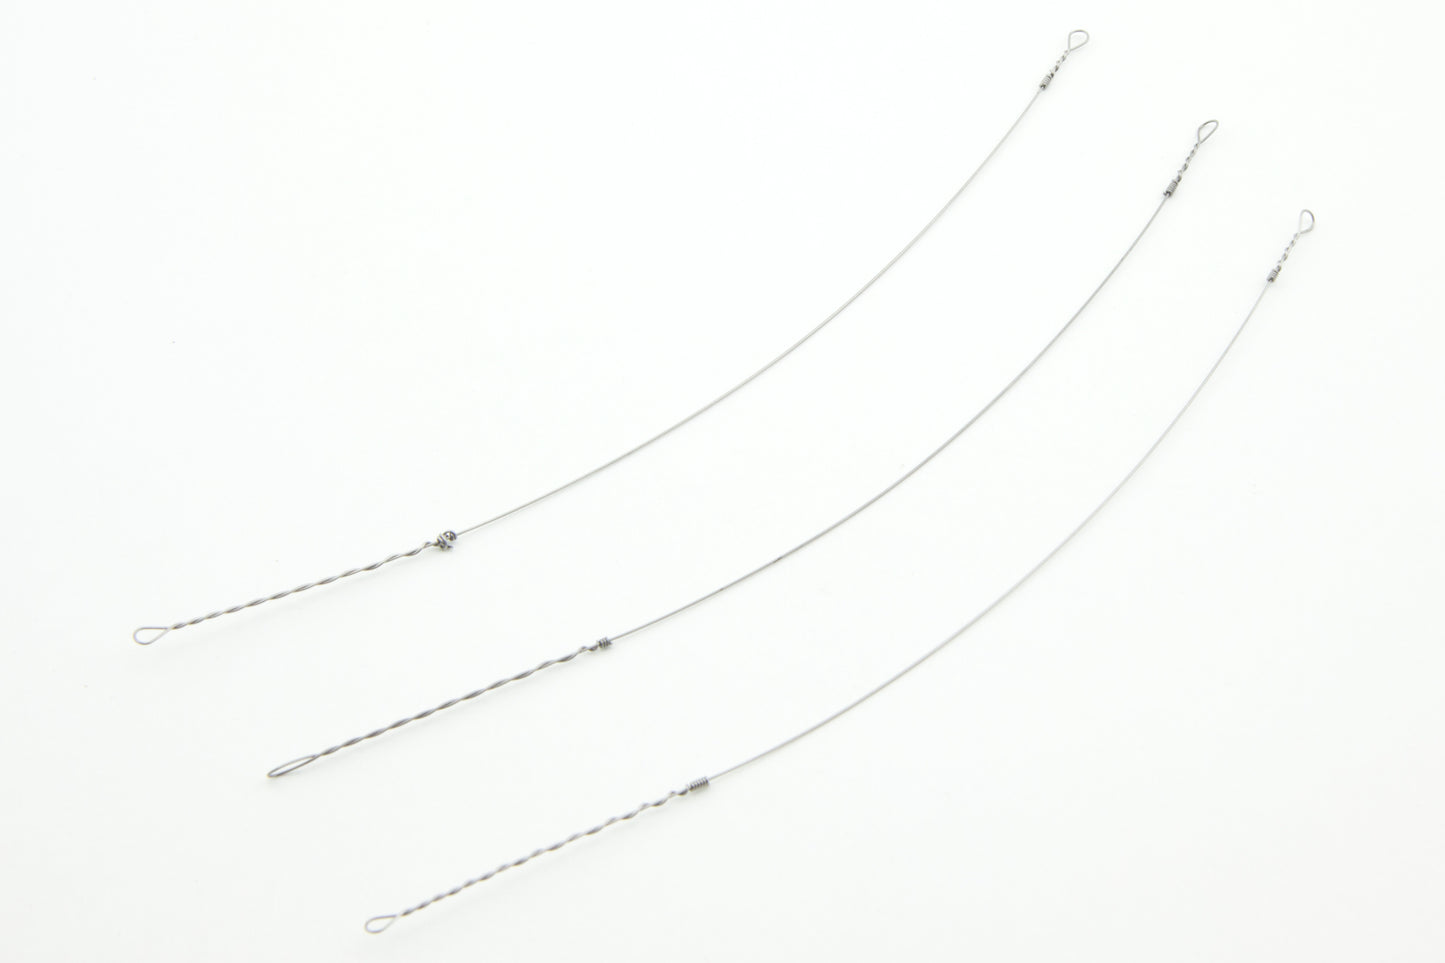 bigceramicstore-com,Dirty Girls Rep. Wires for Handy Facets 3 Pack,Dirty Girls,Tools & Supplies